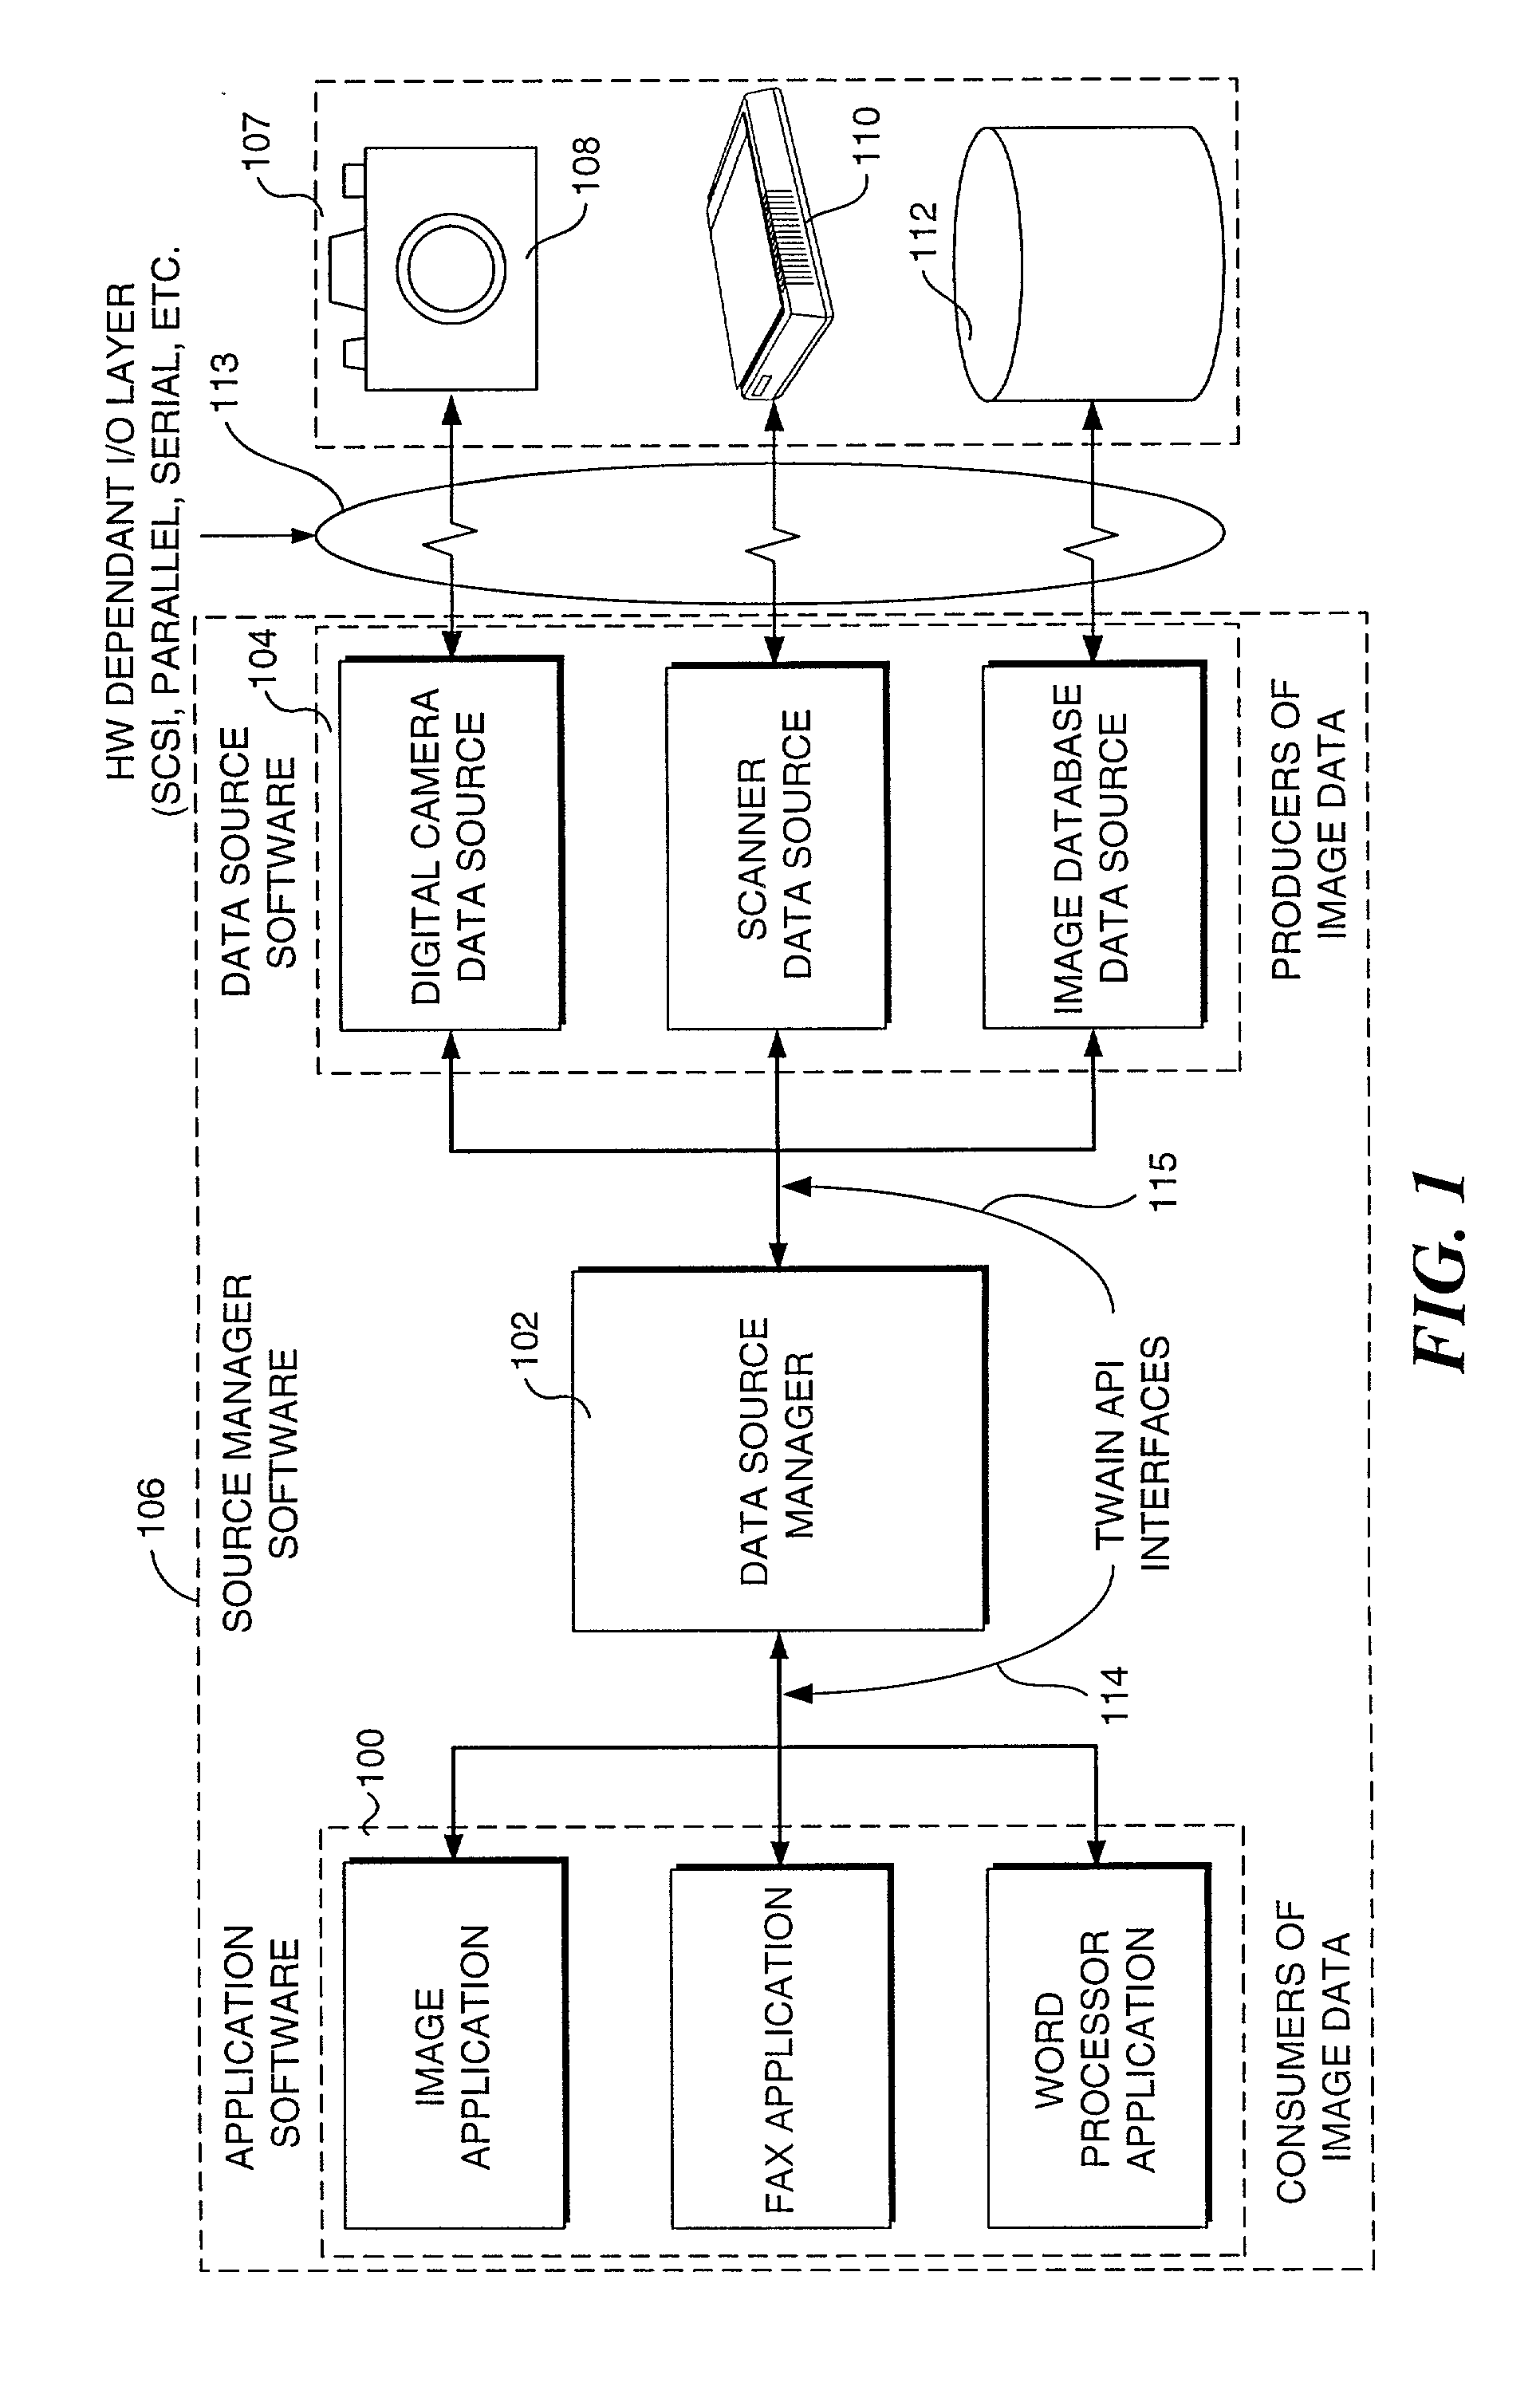 Special API interface for interfacing an application with a TWAIN module, negotiating and presenting a user interface for inserting an image into a document